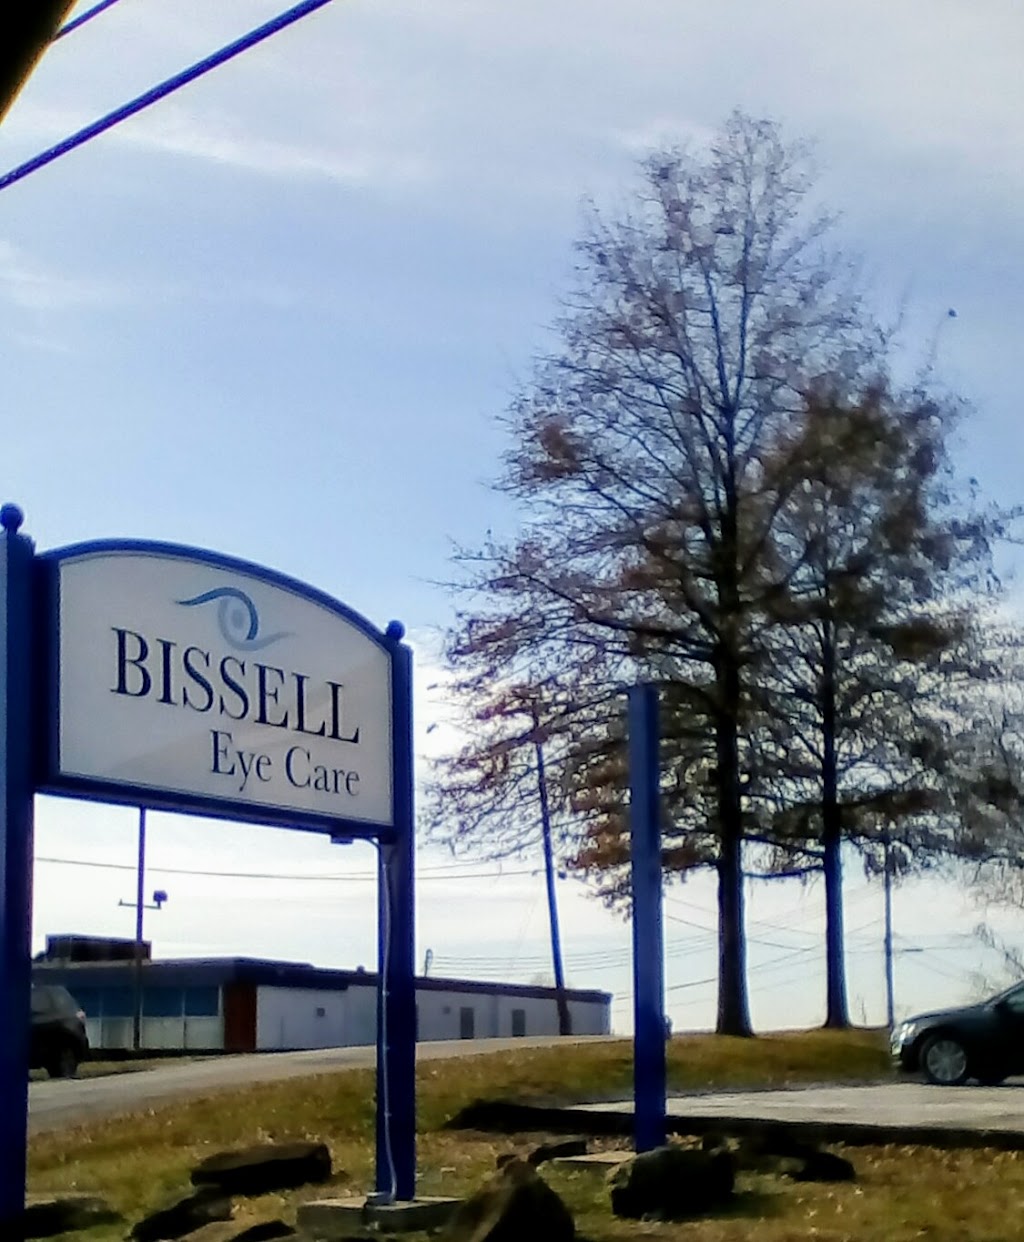 Bissell Eye Care | 4001 Freeport Rd, Natrona Heights, PA 15065, USA | Phone: (724) 226-0444